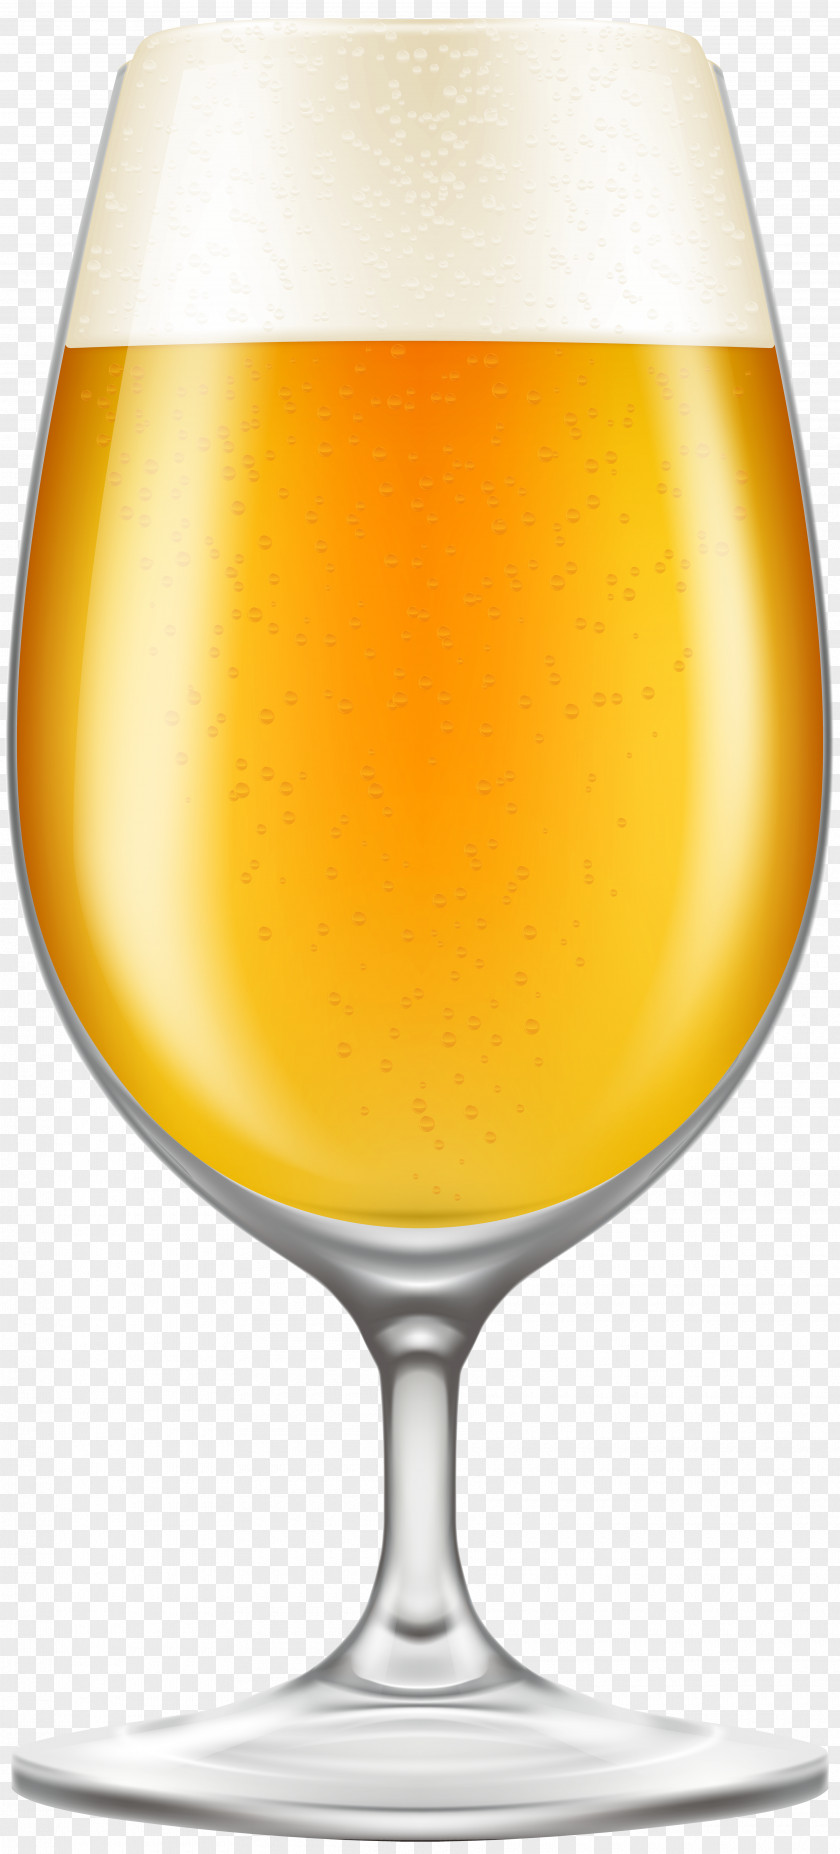 Beer Glasses Stout Drink Ale PNG